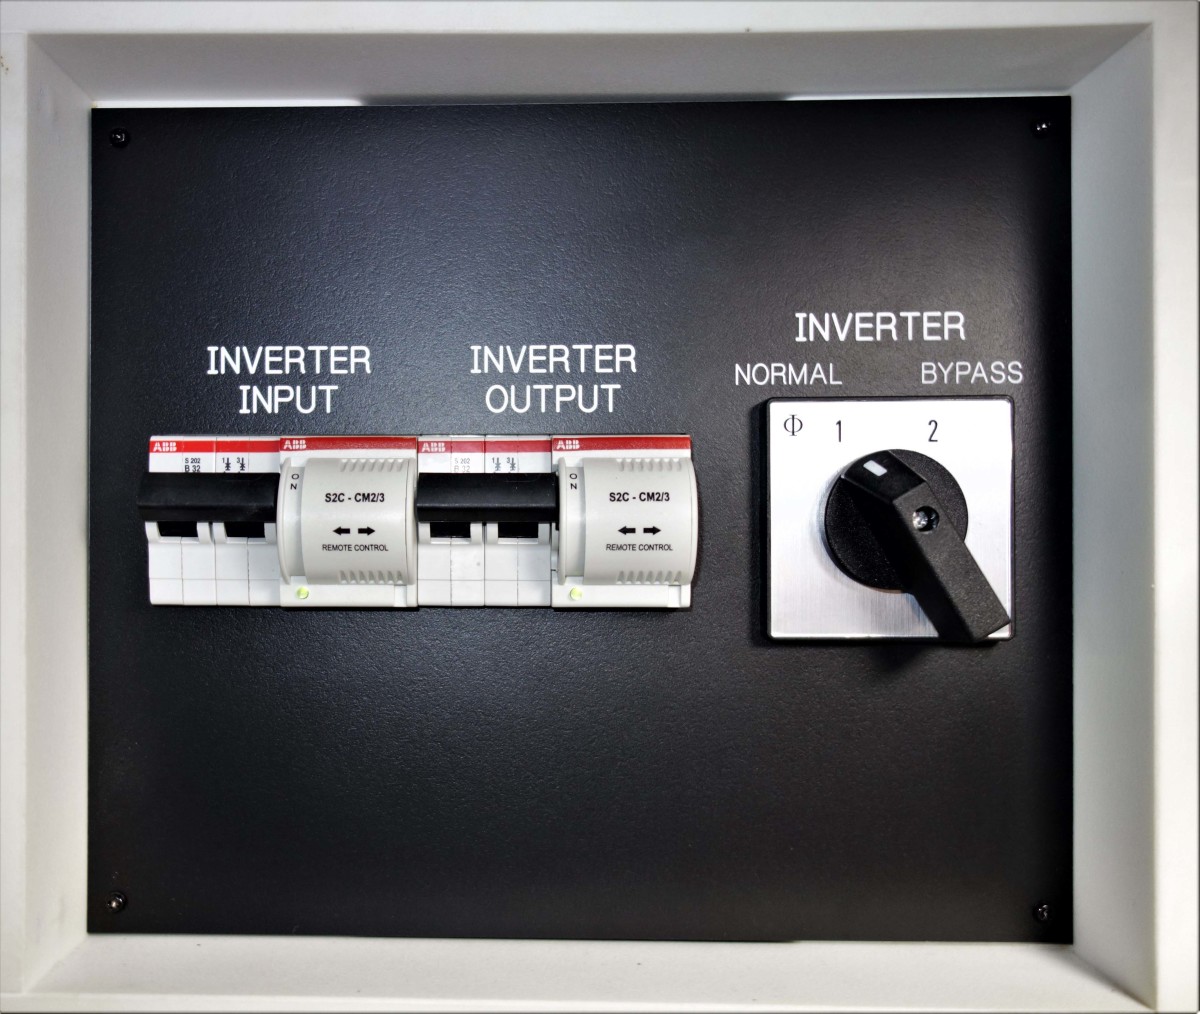 This dedicated inverter AC breaker panel includes a roll switch that can be utilized to bypass the inverter/charger in the event of a failure. This will allow any loads supplied by the inverter/charger to continue to work on shore or generator power.